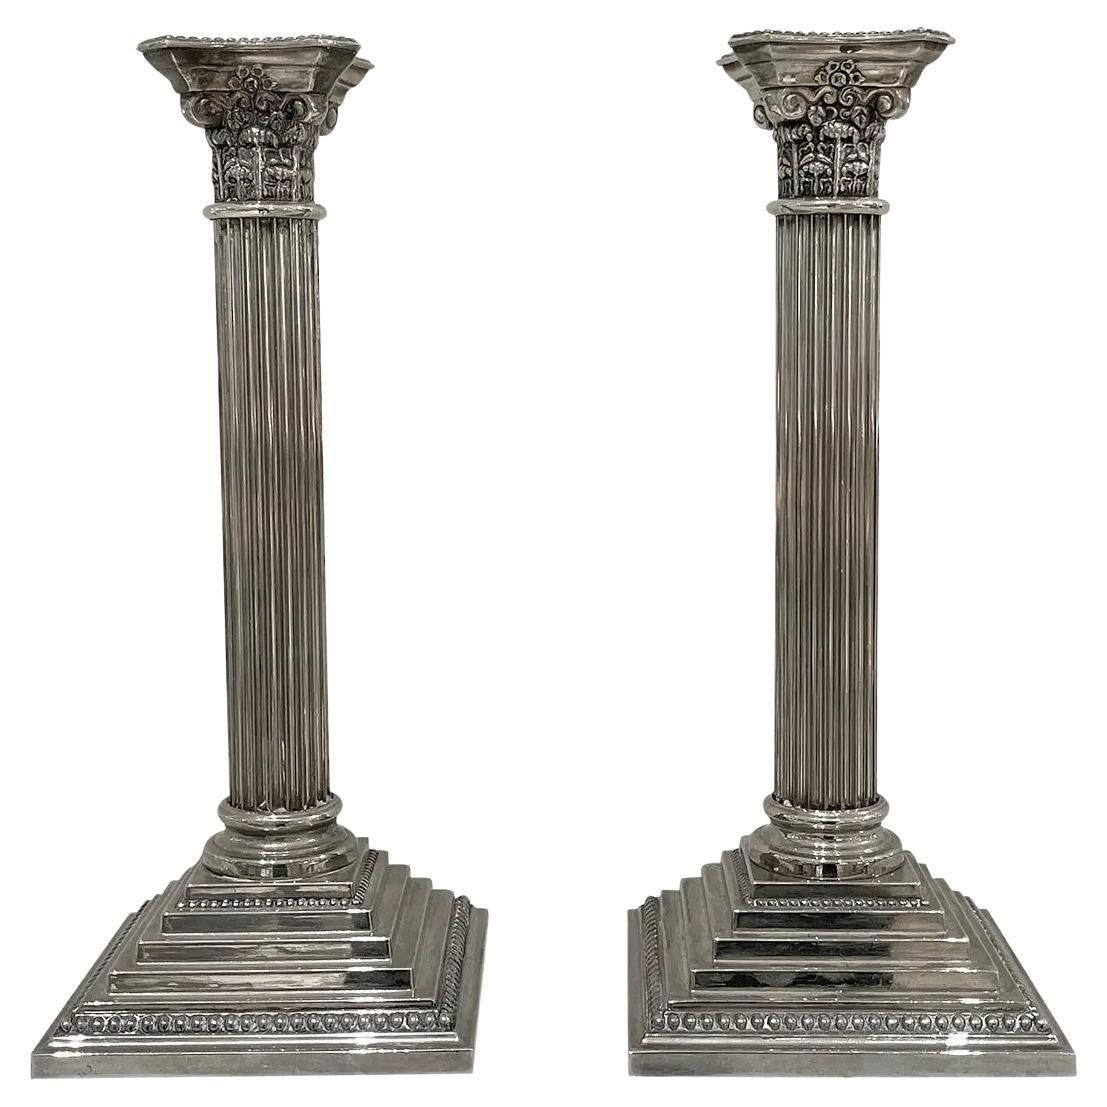 20th Century American Pair of Silver-Plated Metal Candle Holders by Godinger For Sale